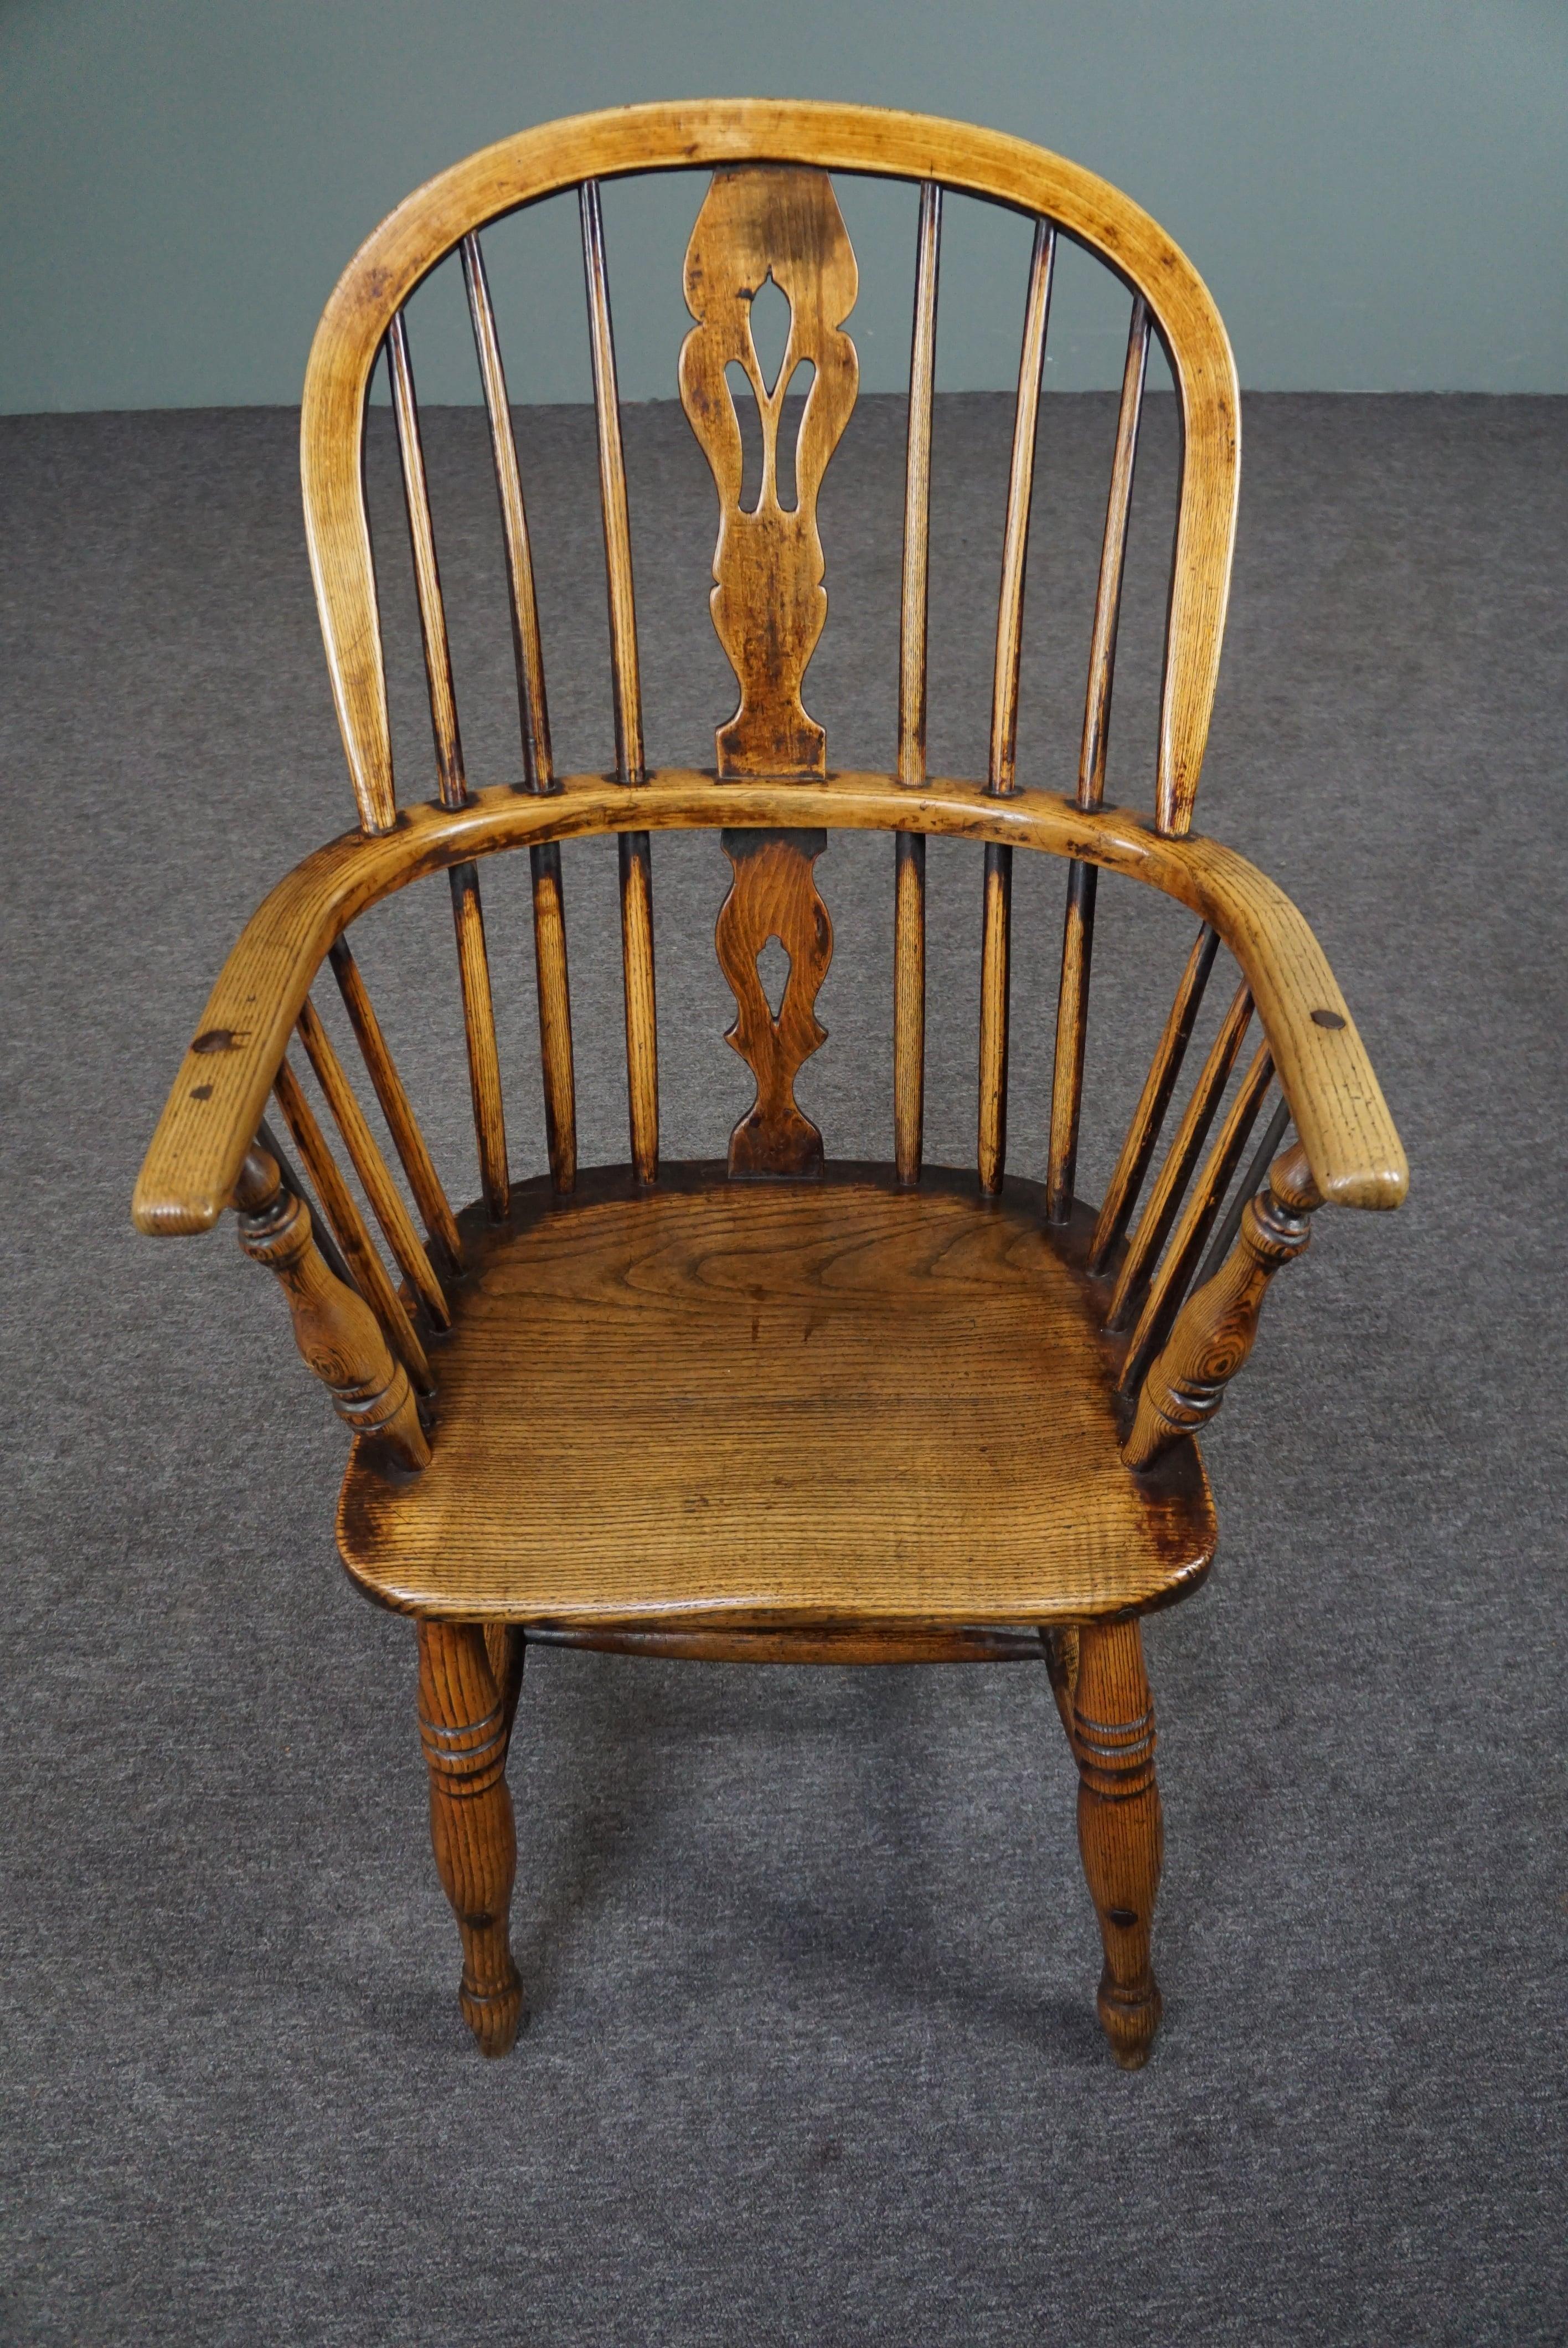 Hand-Crafted English antique High Back Windsor armchair/chair, 18th century For Sale